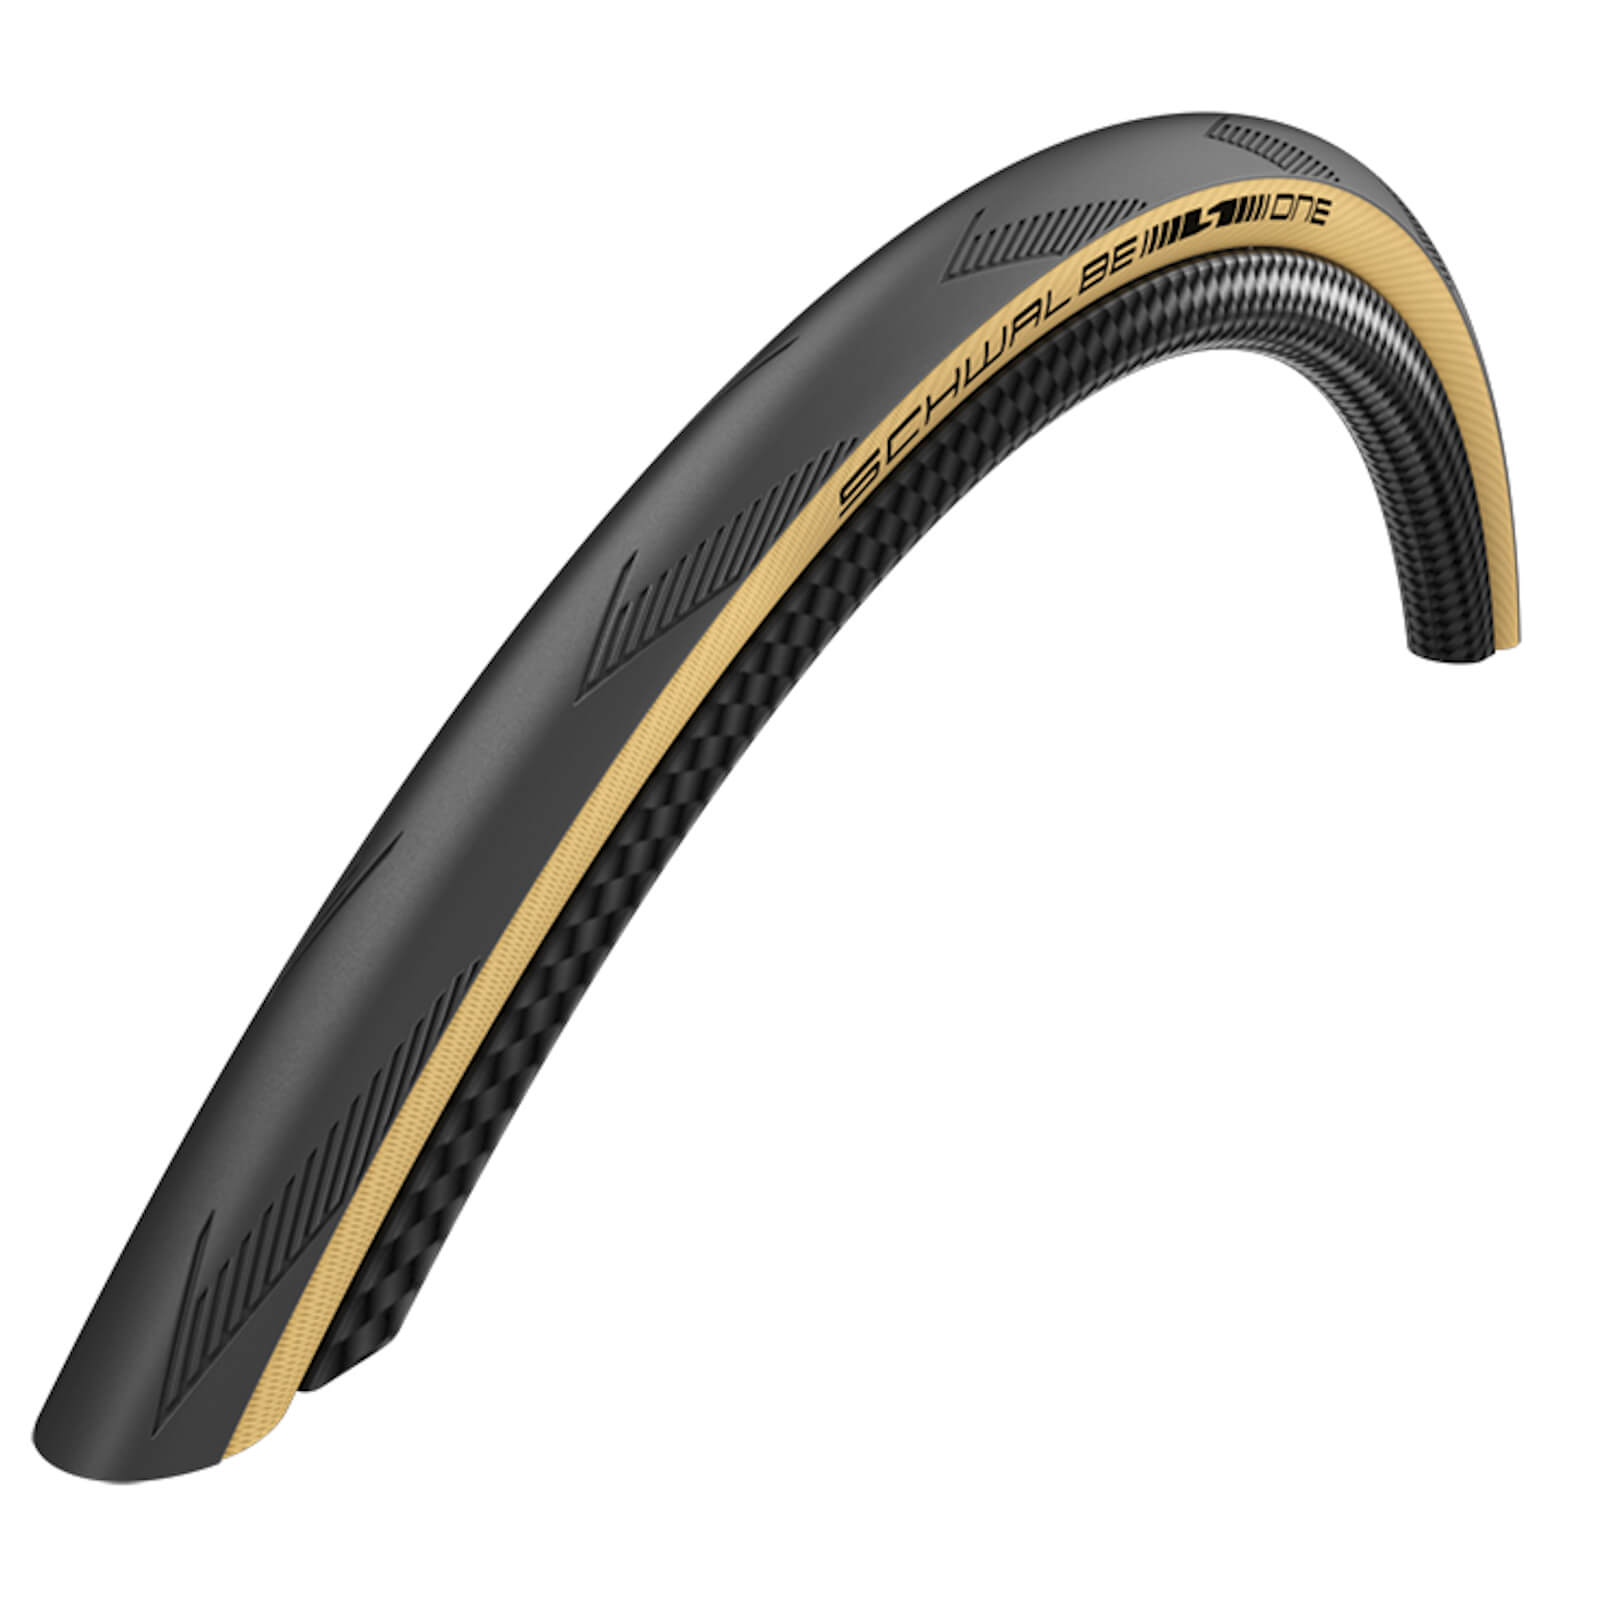 Schwalbe One Performance Road Tyre - 700 x 25C - Classic Tan